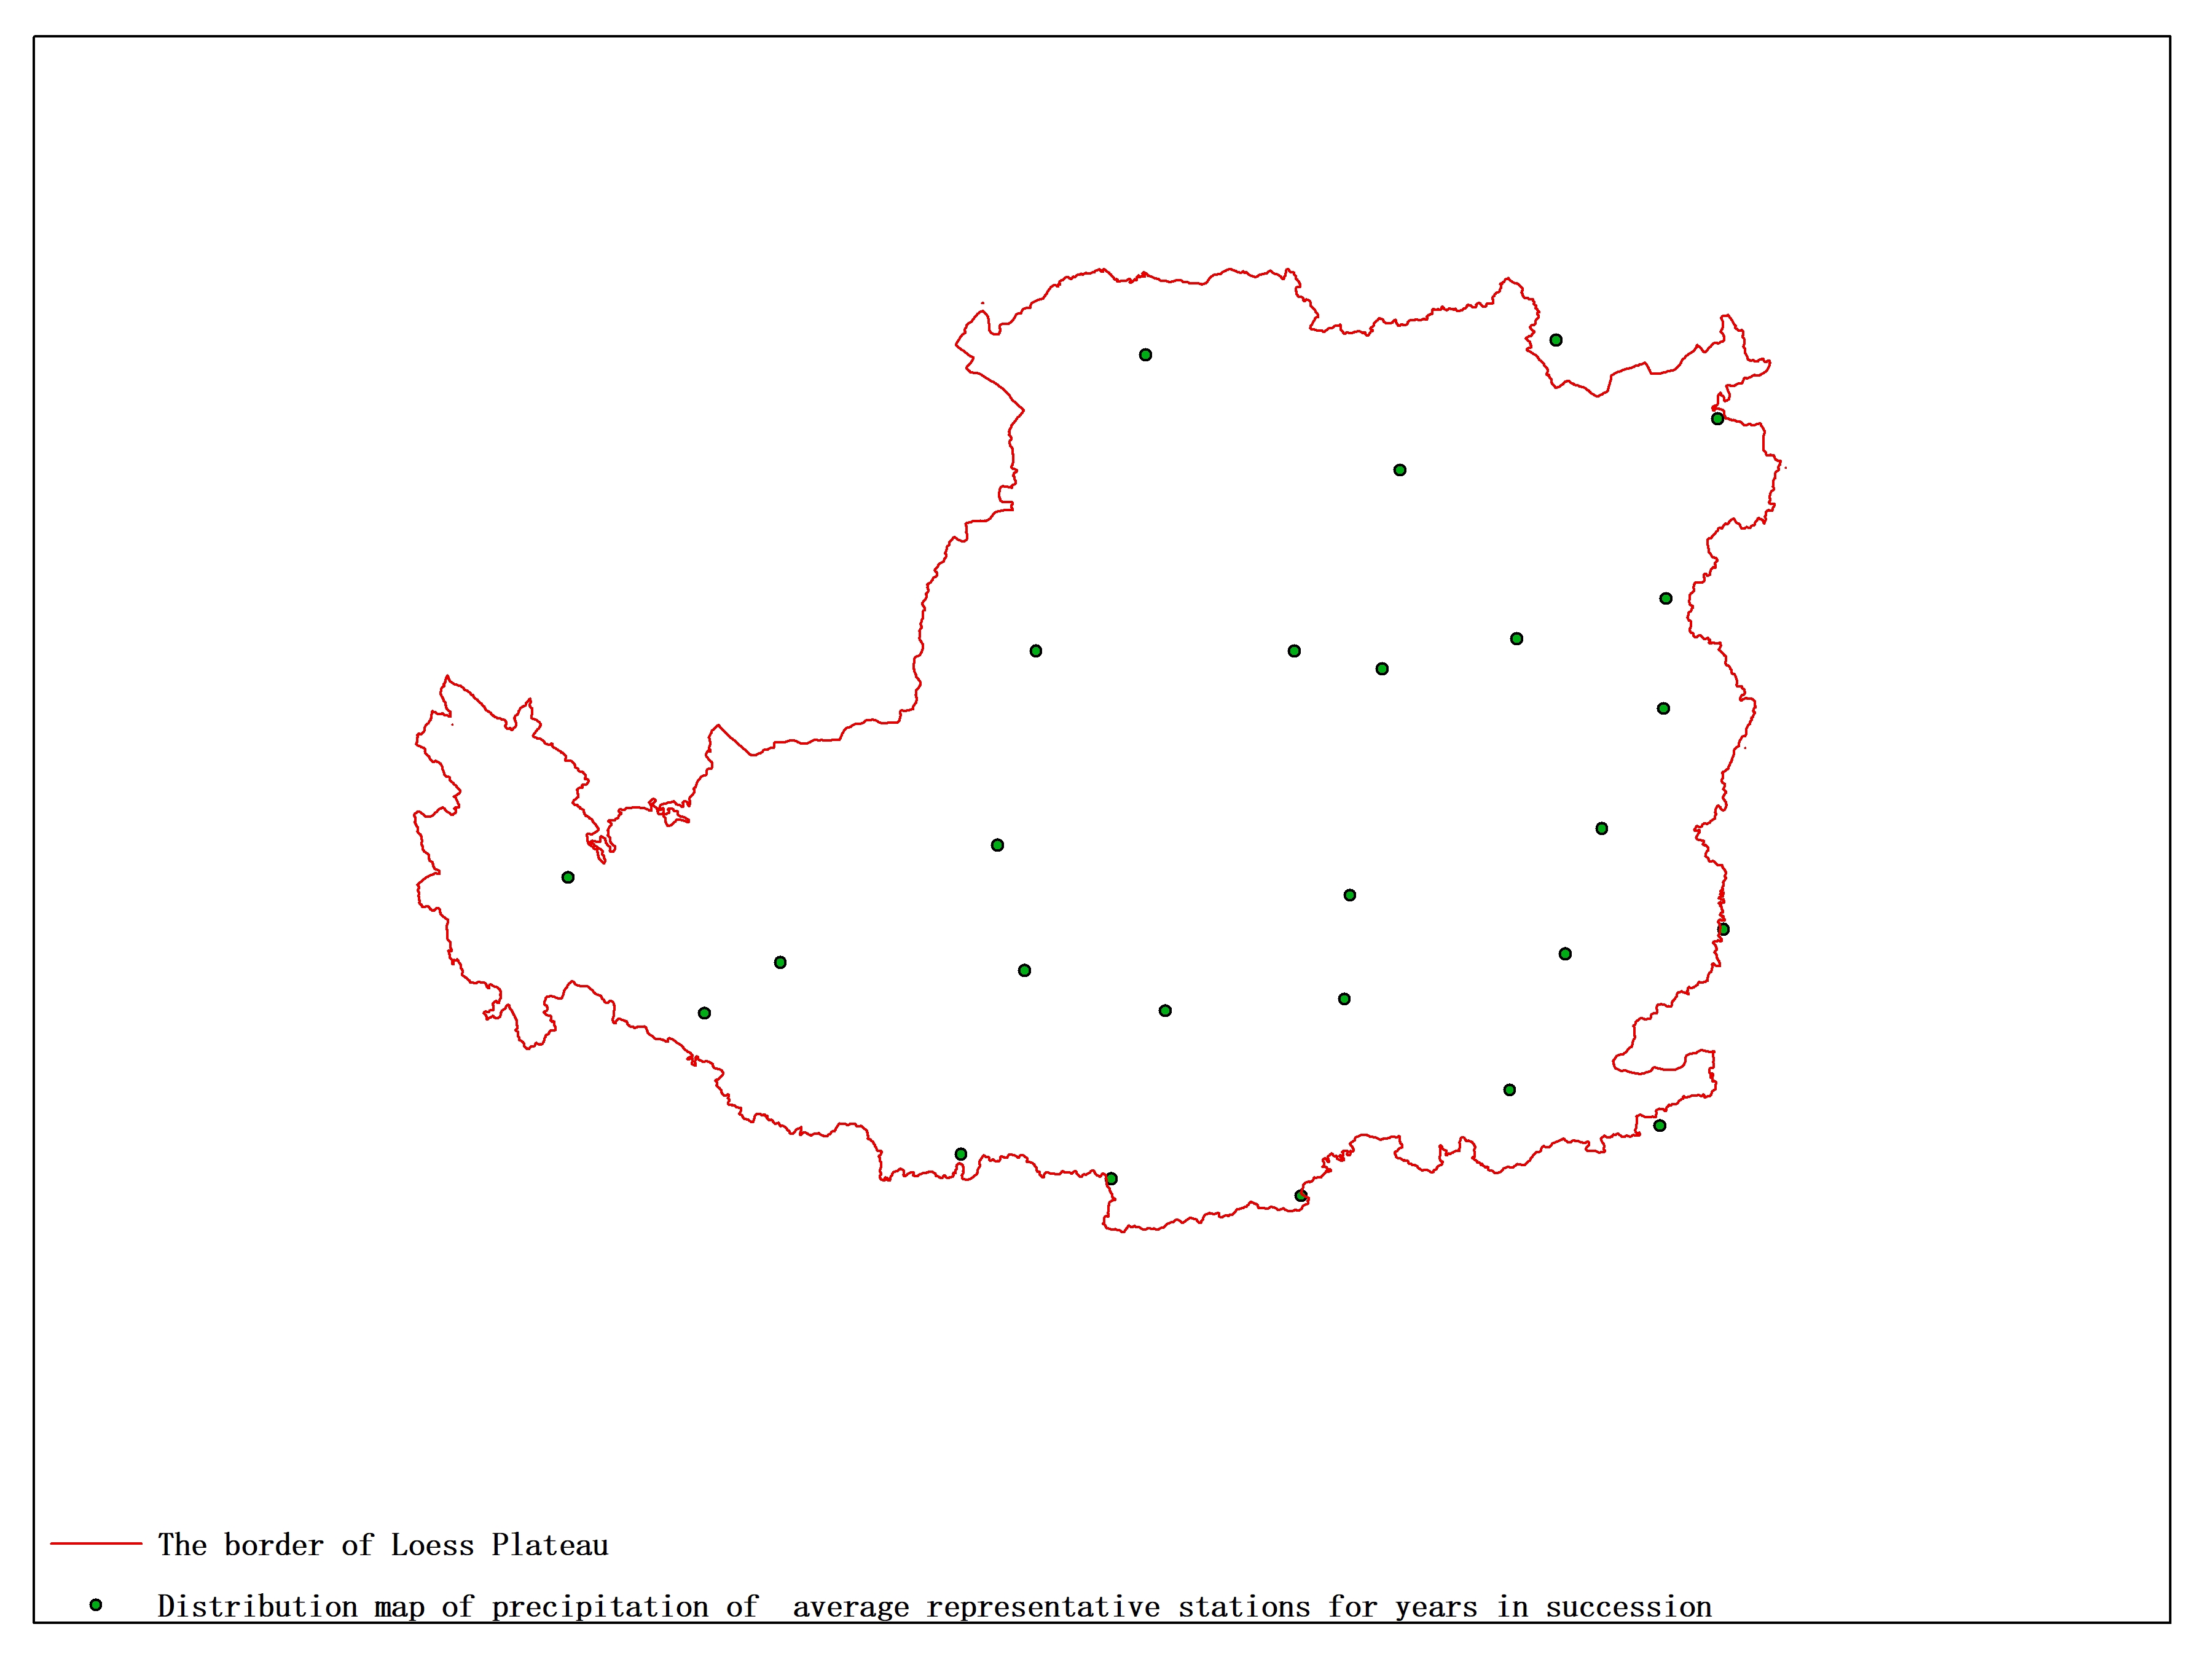 Agricultural climate resource atlas of Loess Plateau-Distribution map of precipitation of representative stations in typical waterlogging year(1964)